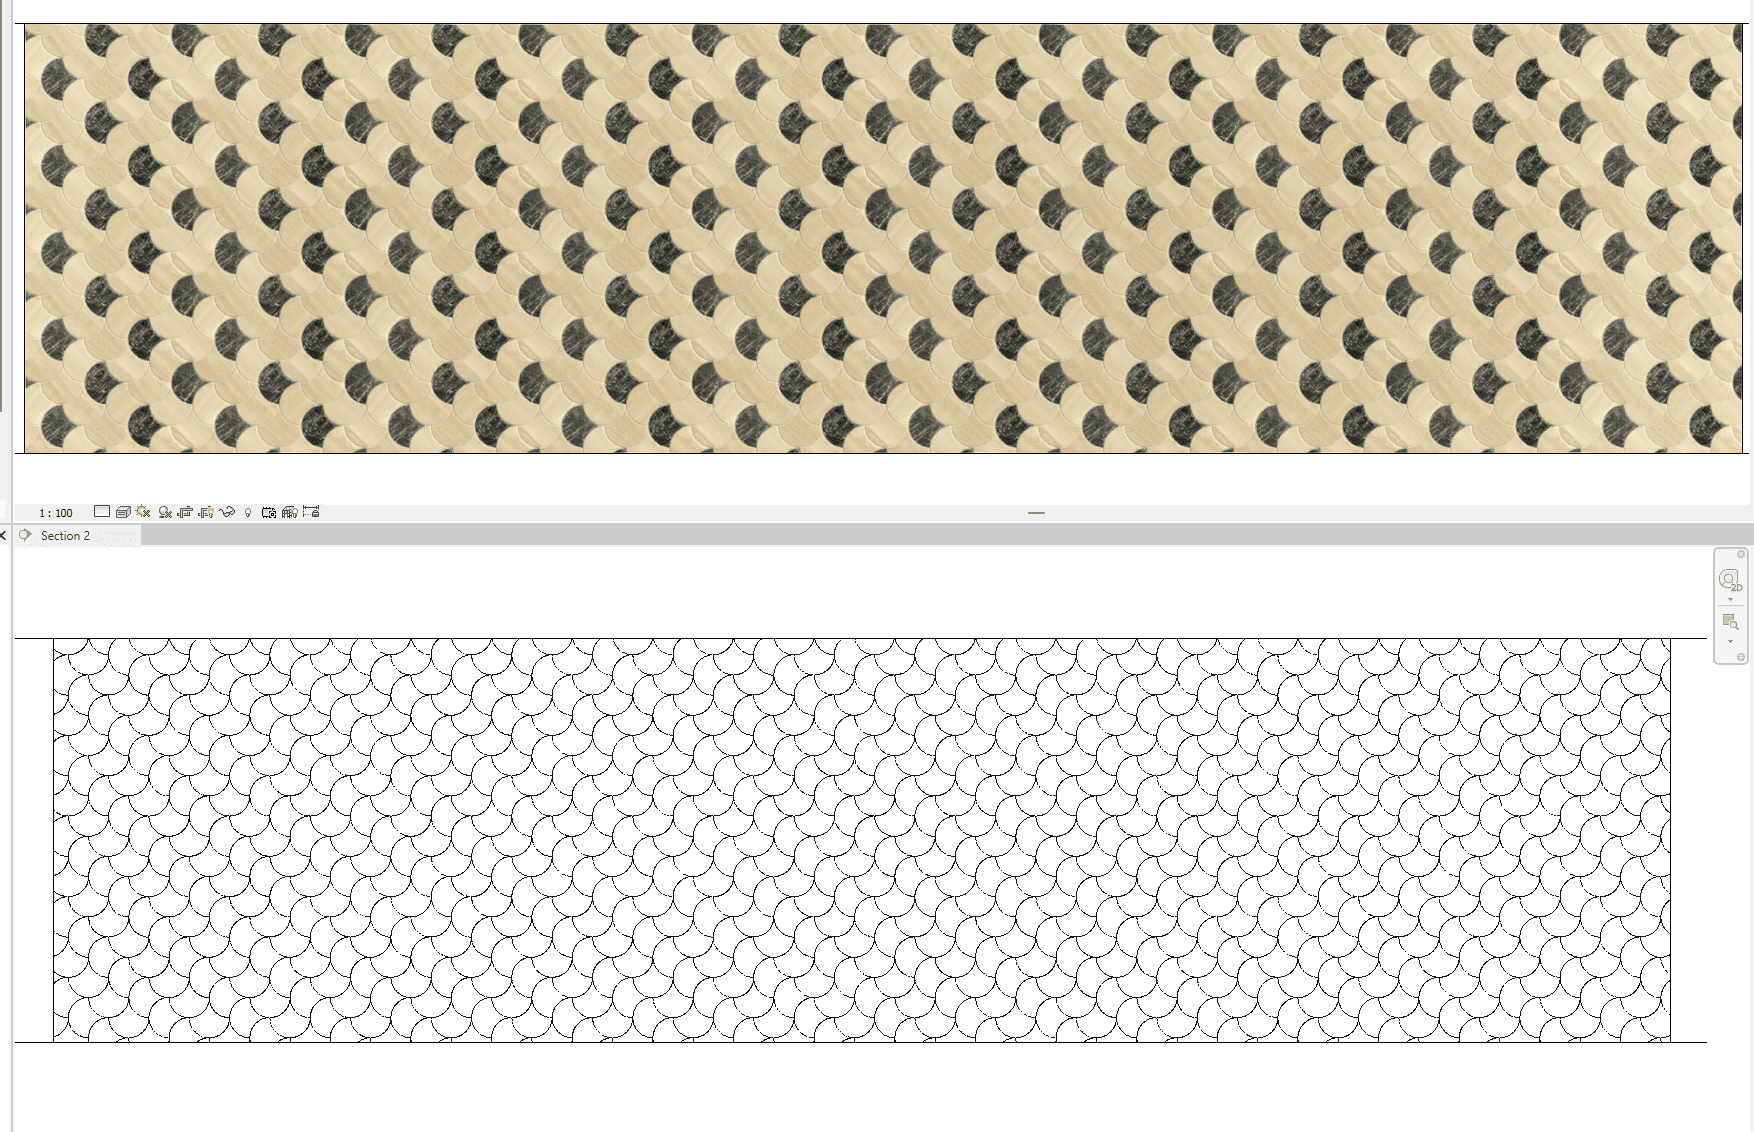 Comparison of a colorful fish scale texture pattern above and its corresponding black and white hatch pattern below in a design software interface.